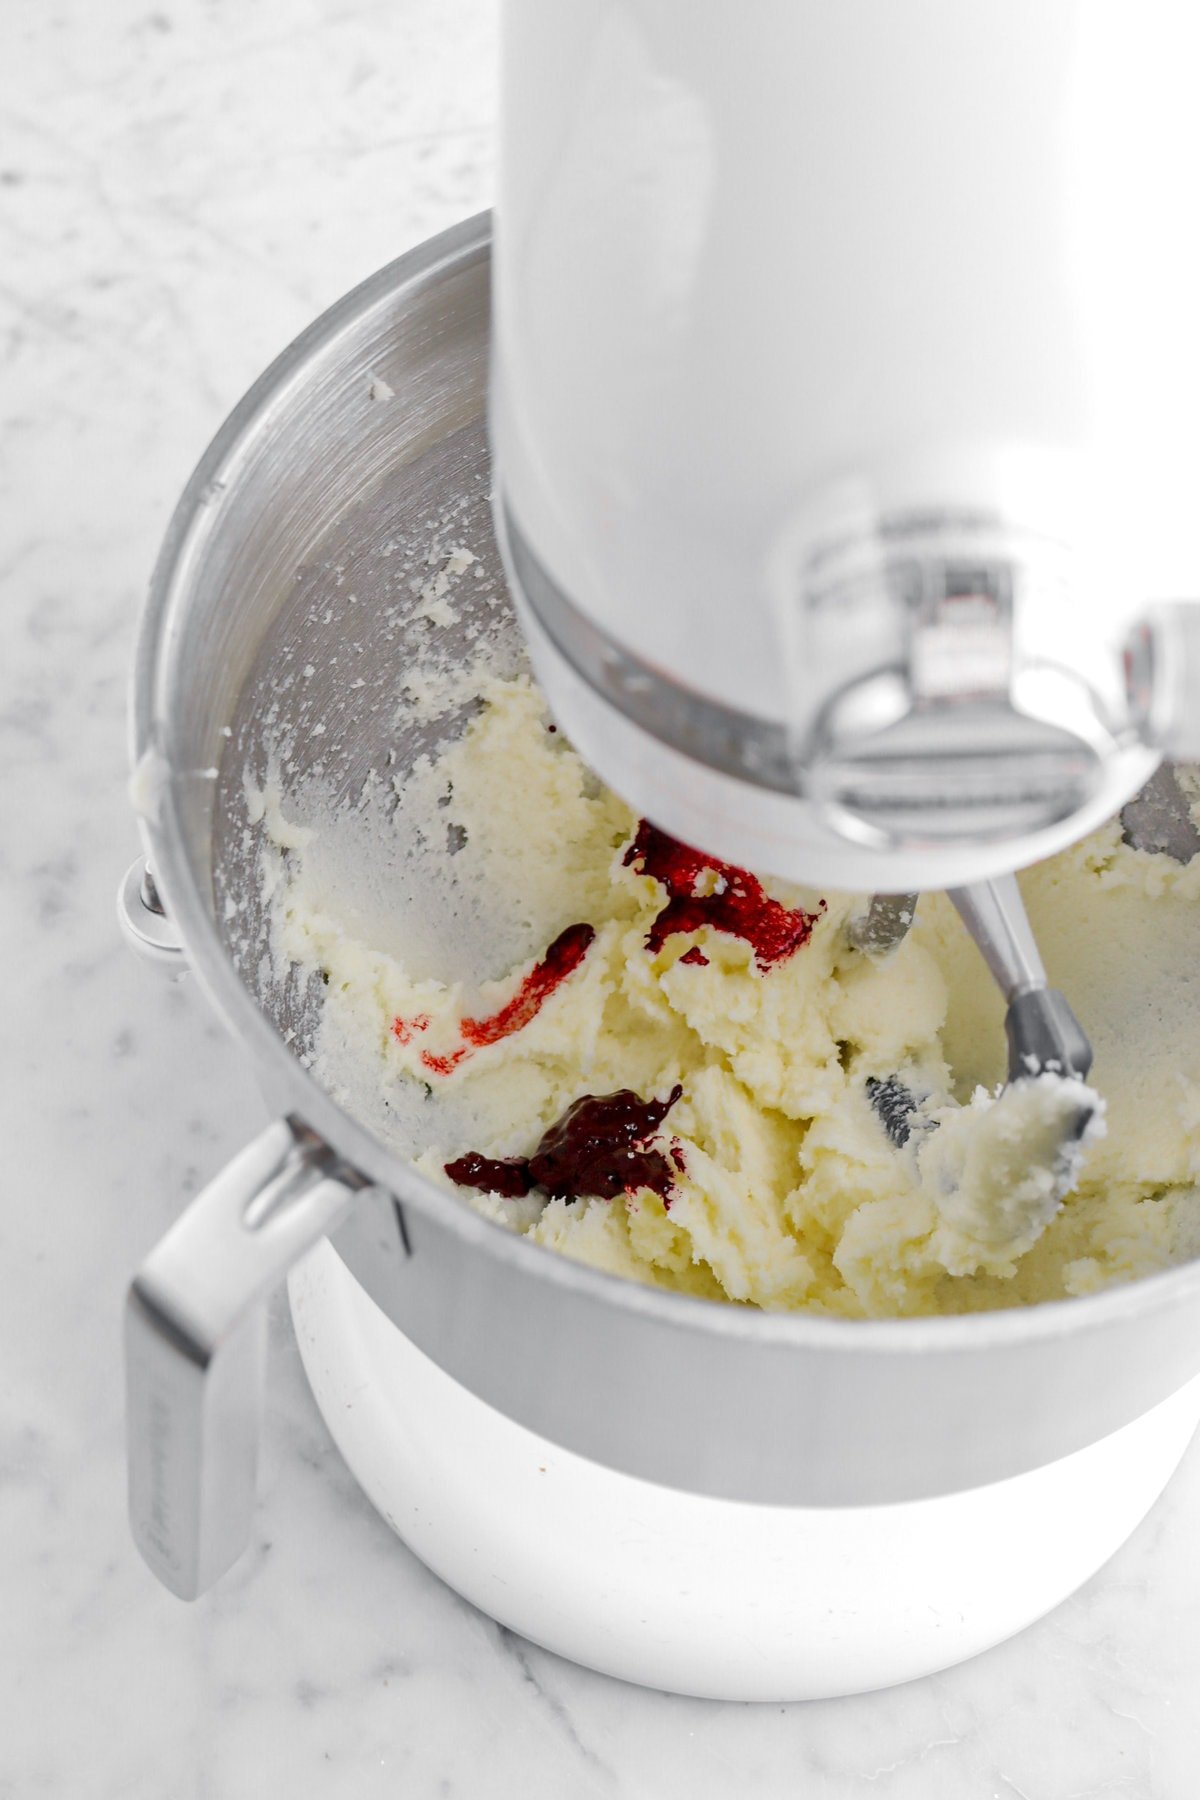 red food dye added to butter and sugar in stand mixer.